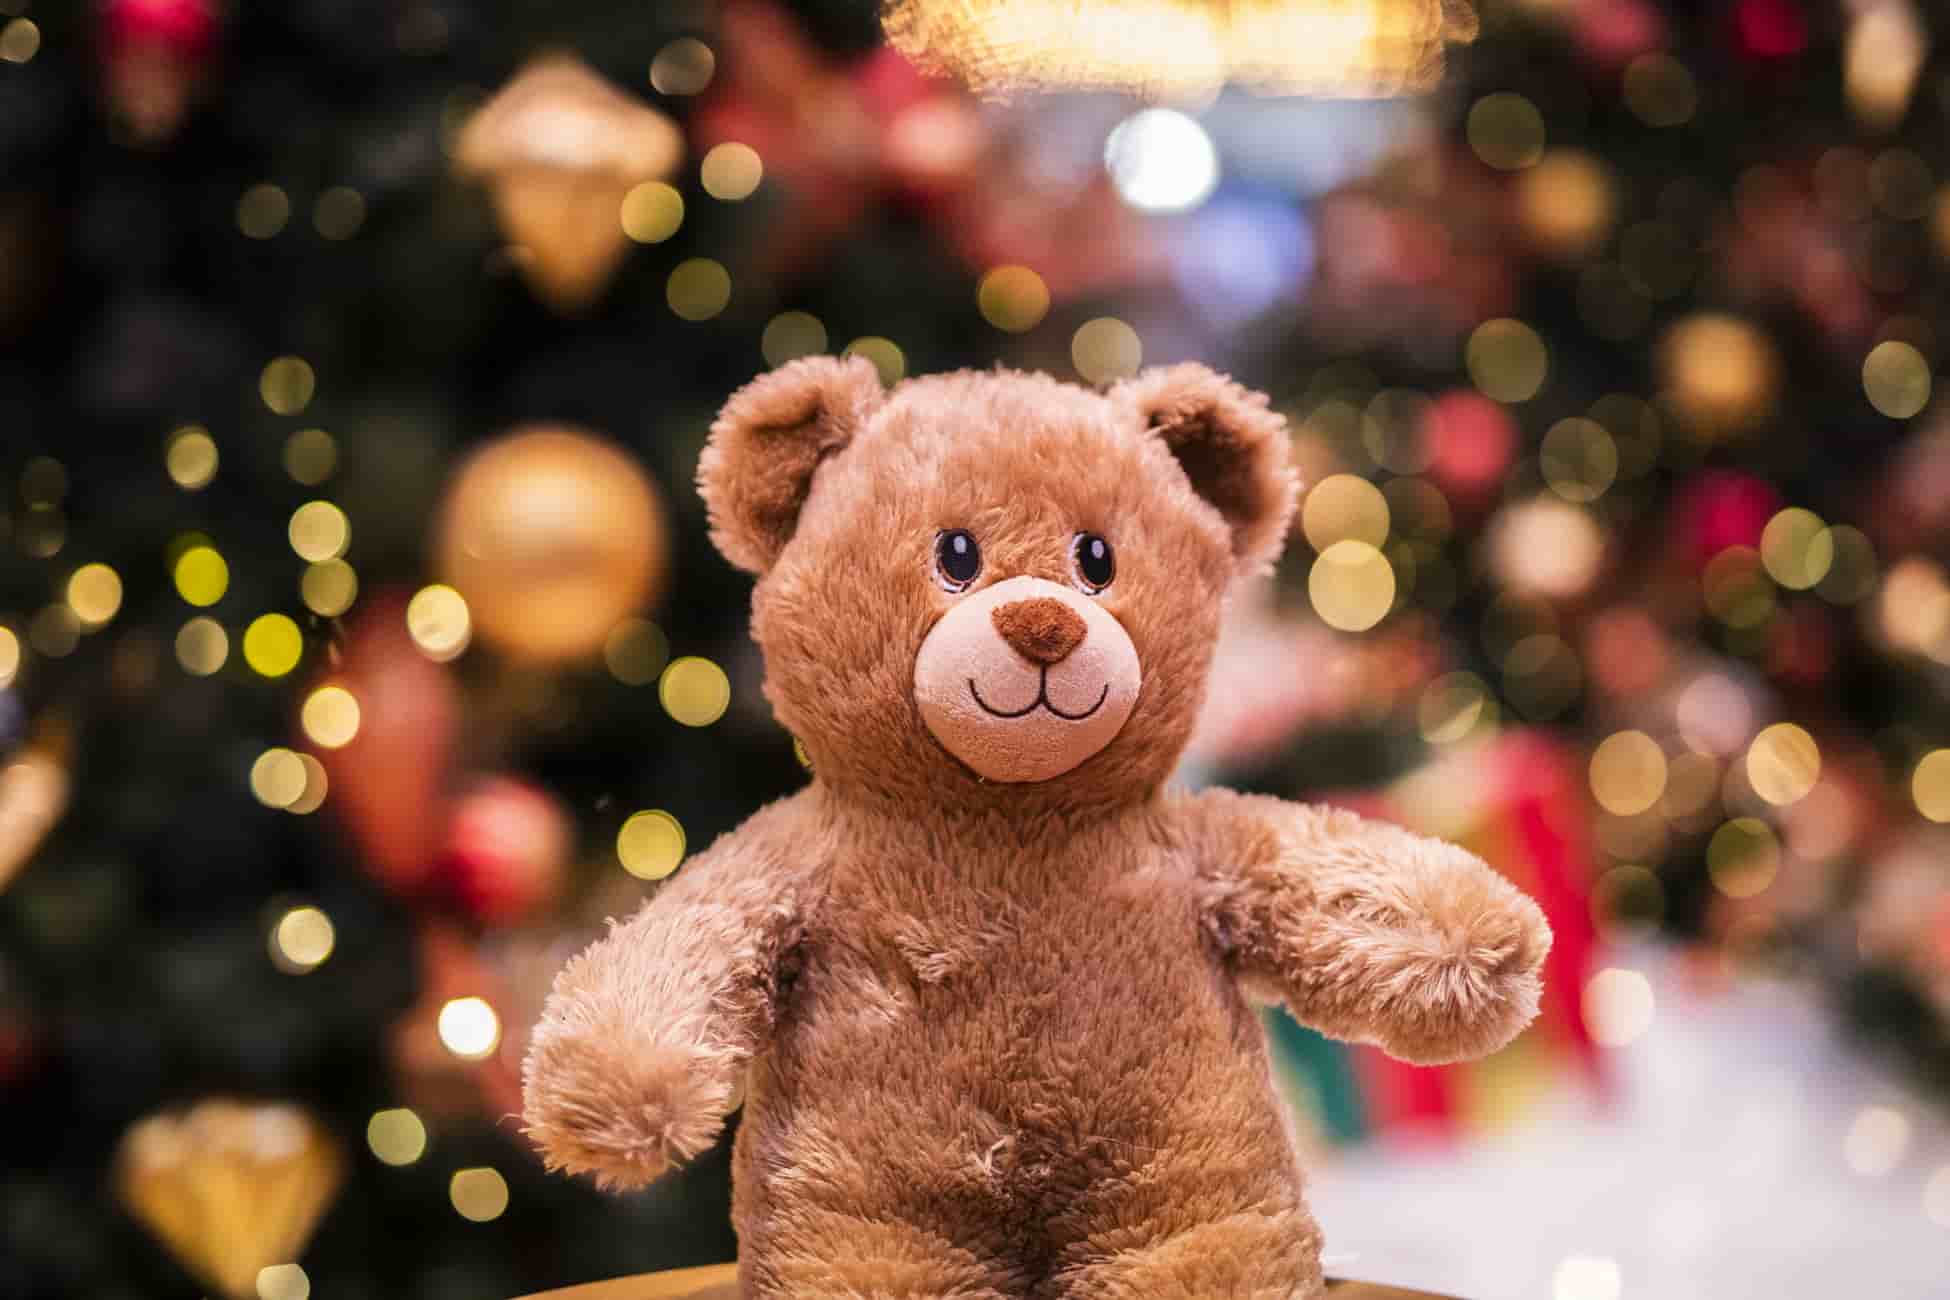 100+ Most Beautiful Teddy Bear Images [ Lovely Collection ]